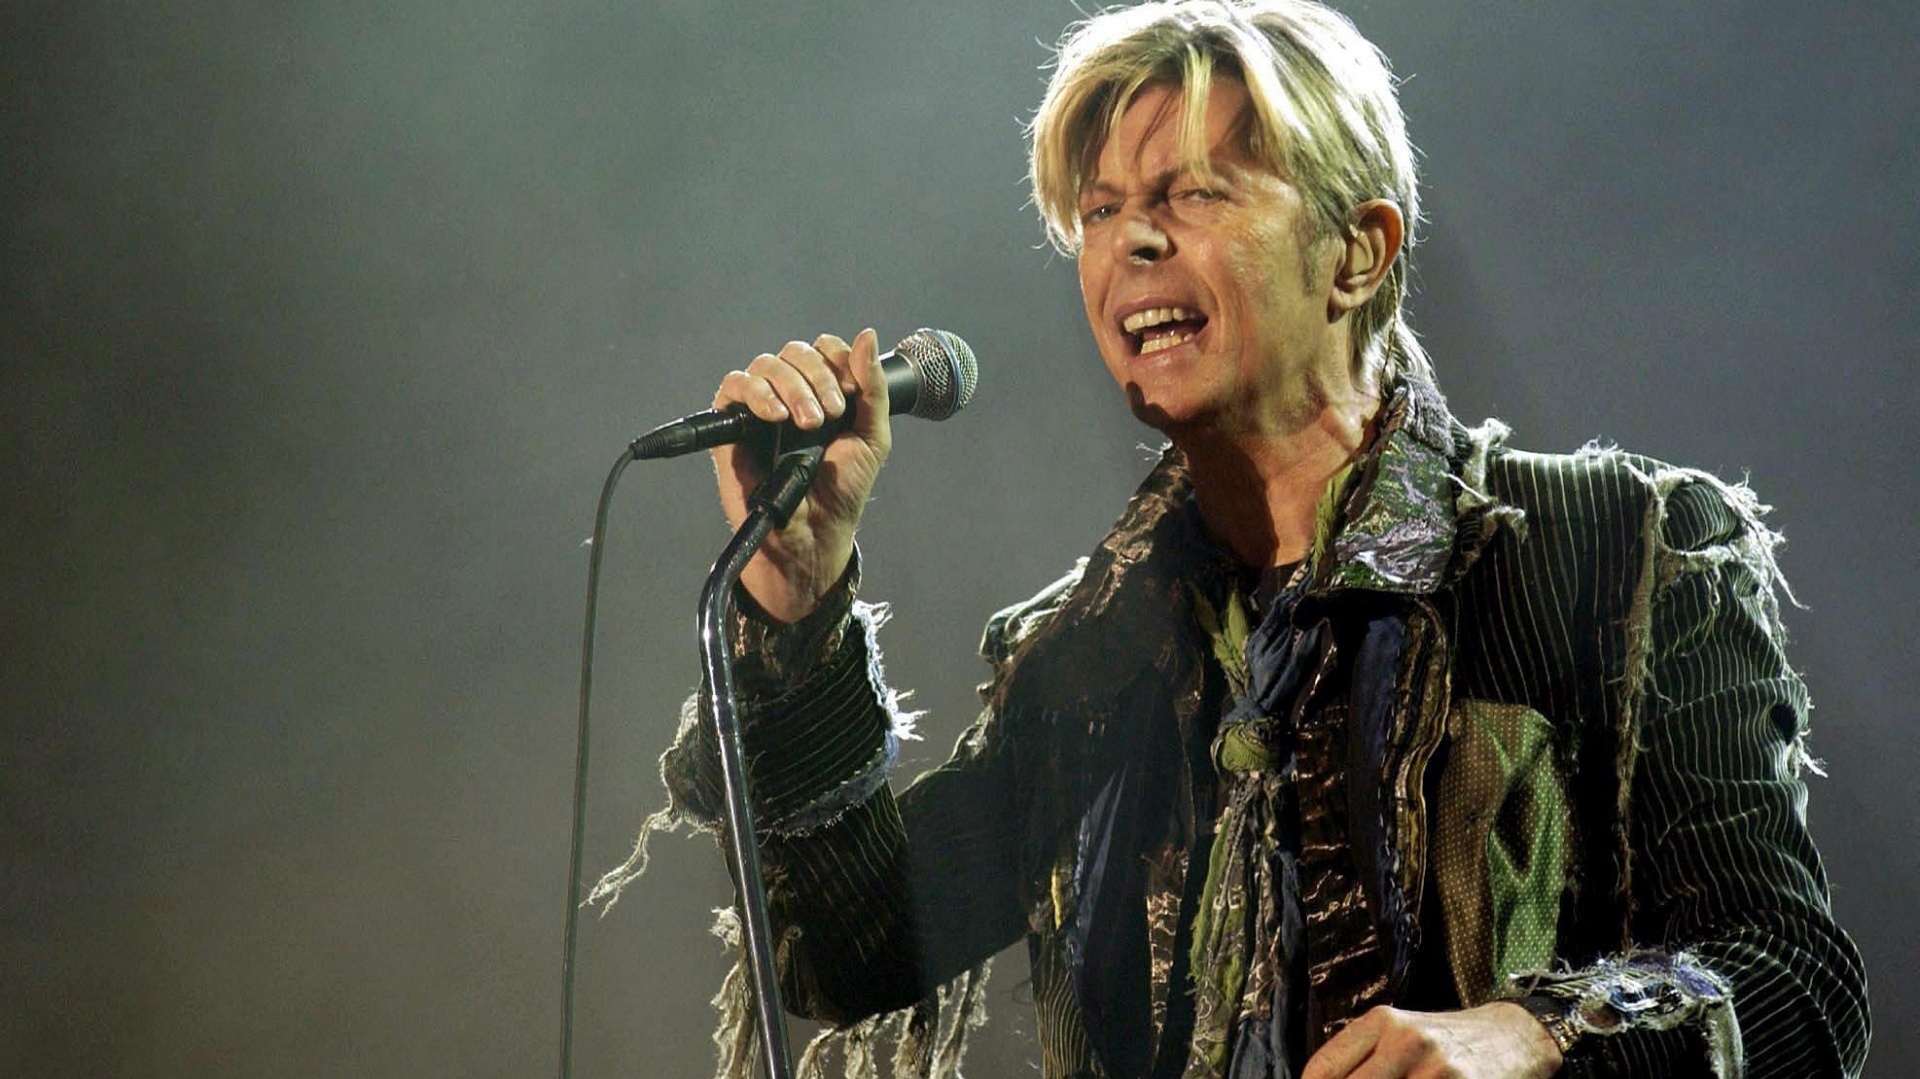 David Bowie tribute concert streamed to raise funds for charity